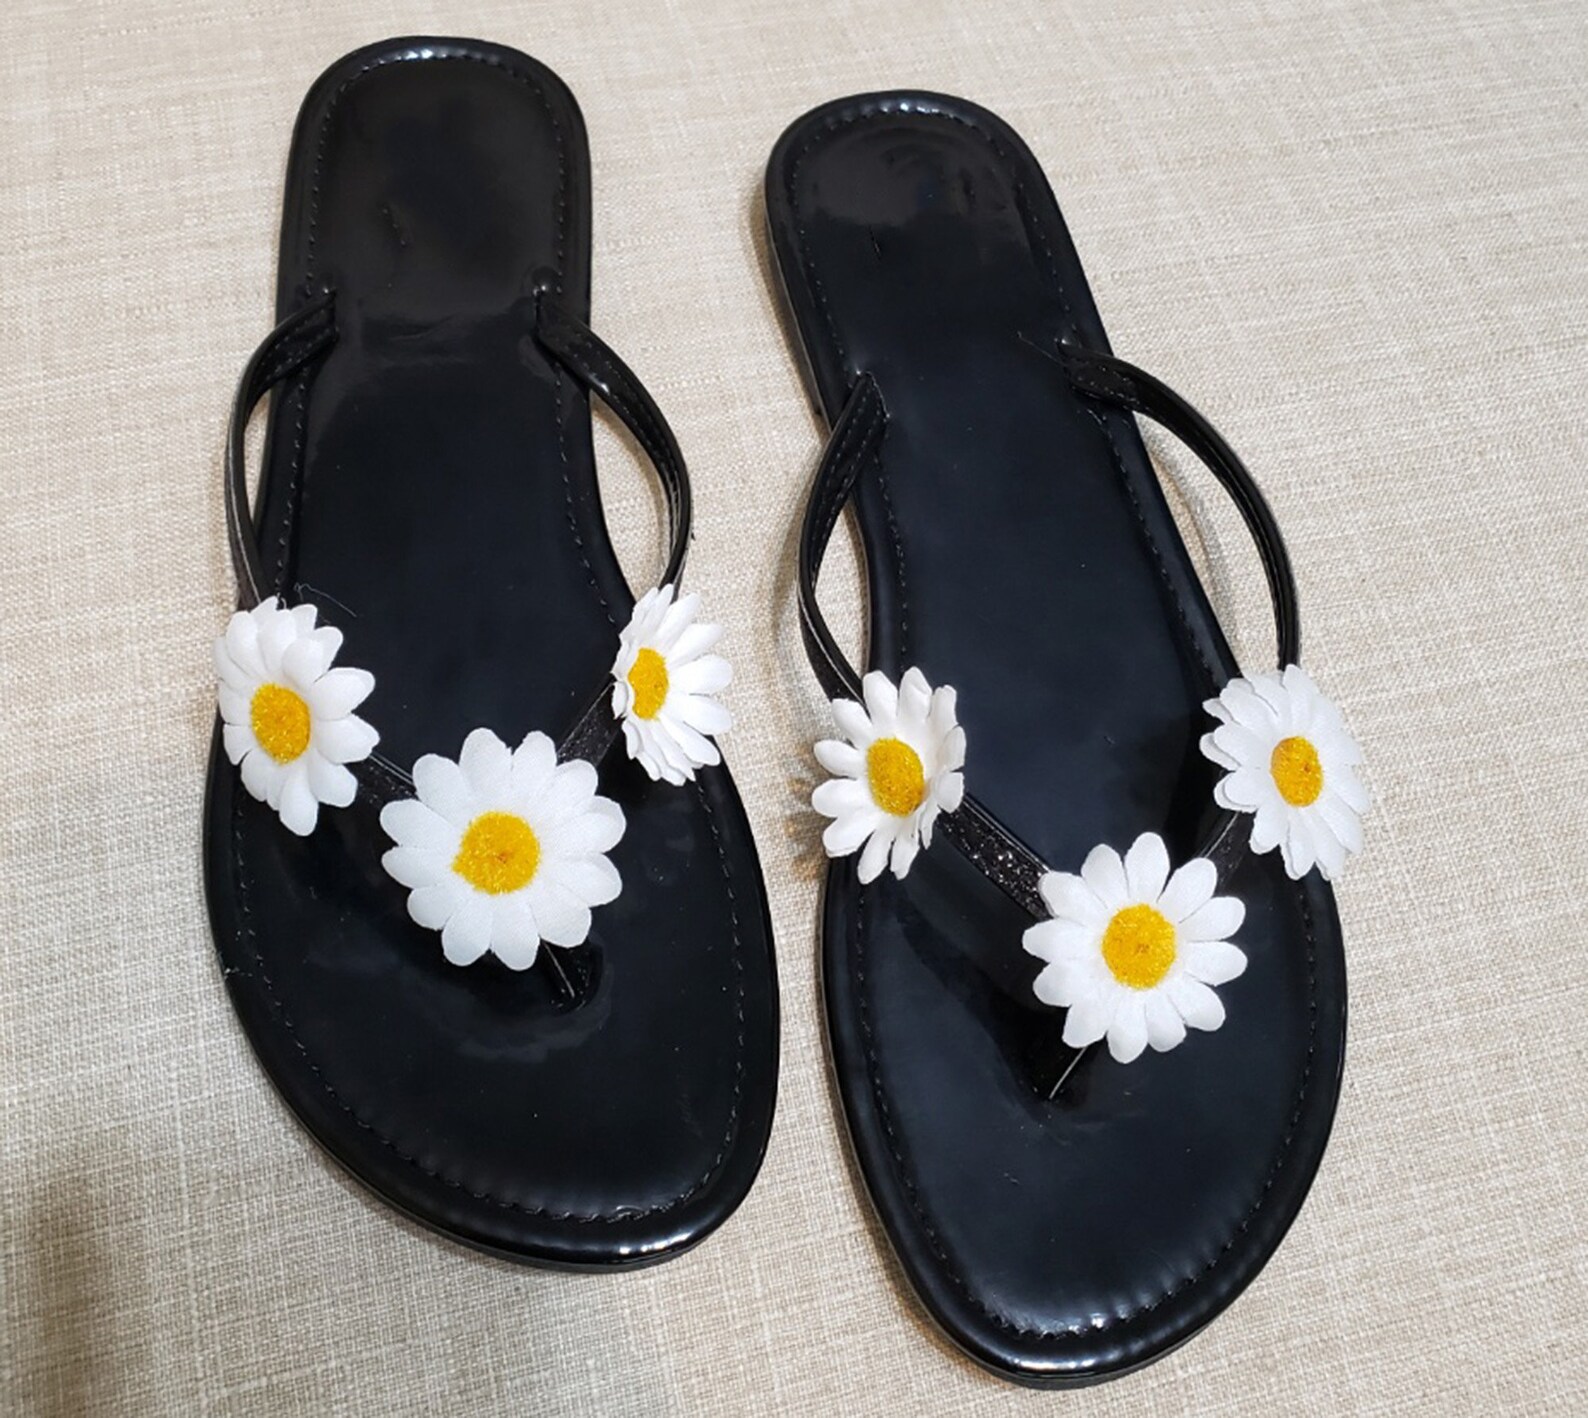 Women's slippers/ Sunflowers sandals/ Casual Flat Thong | Etsy